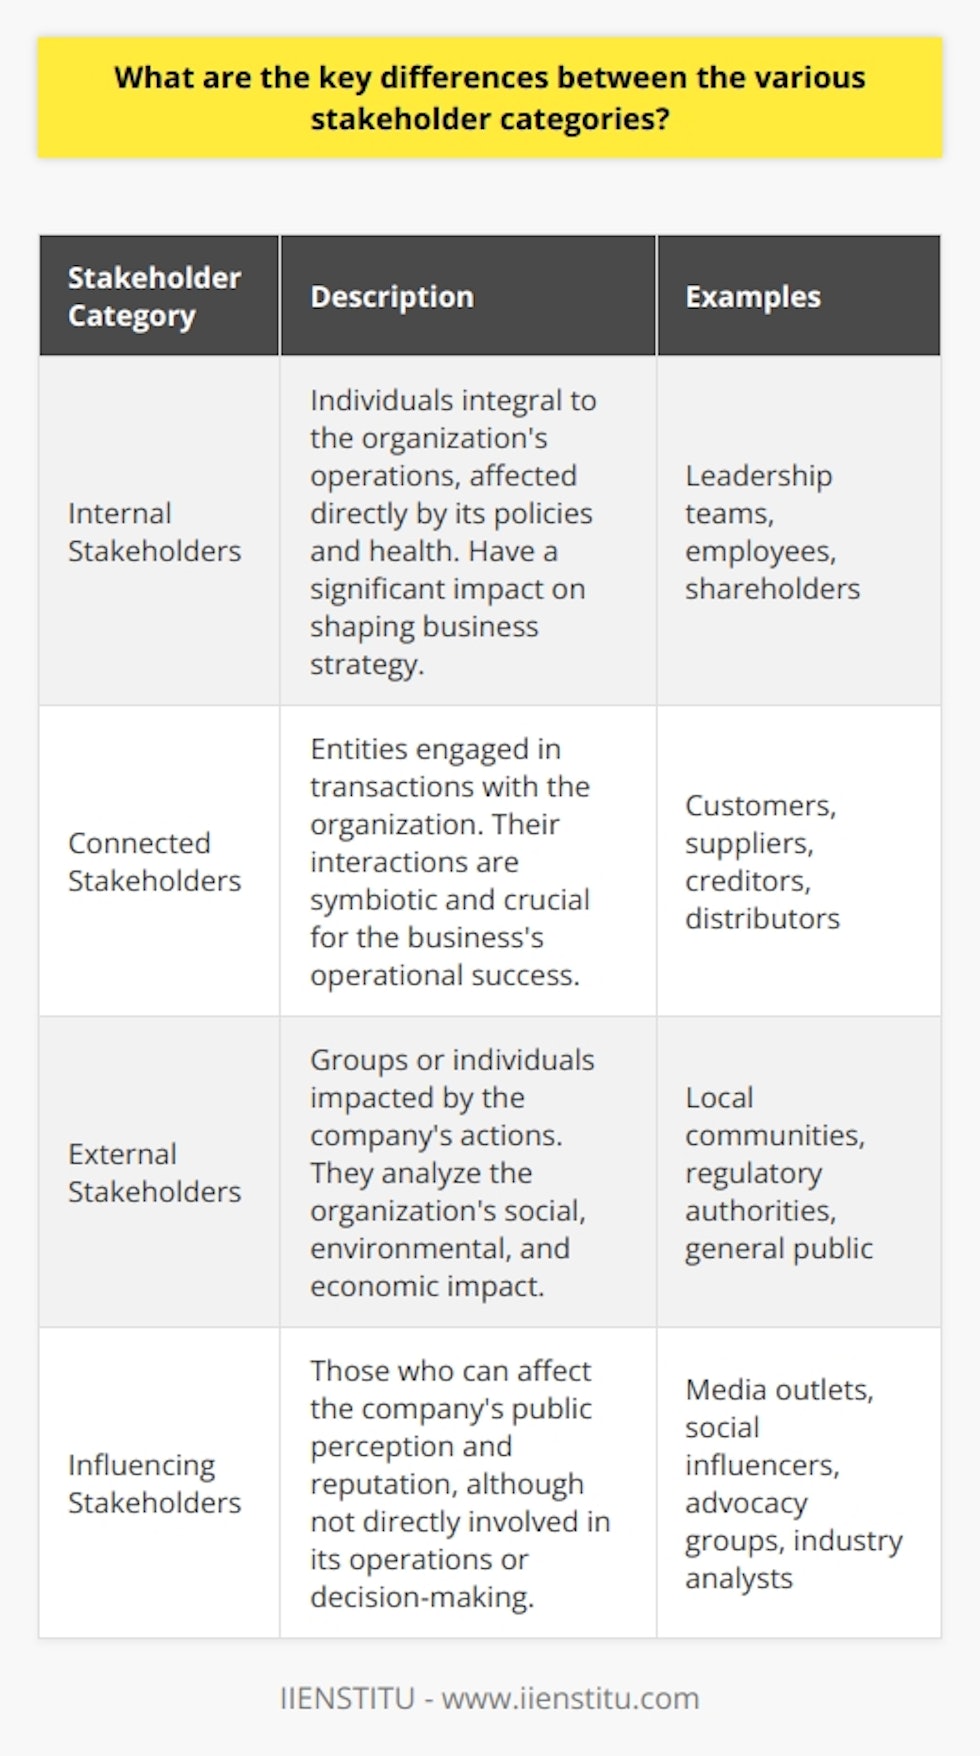 Stakeholder categories are diverse and their roles with respect to an organization differ markedly, carrying implications for how an organization engages with and addresses their needs and concerns.Internal Stakeholders represent the core of the organization. These are the individuals whose daily work dictates the performance and culture of the company. Typically, this group, including leadership teams, employees, and shareholders, is directly impacted by the company's policies and health. Their input can dramatically shape the business’s strategic direction.Connected Stakeholders maintain a transactional relationship with the organization and usually include entities such as customers, suppliers, creditors, and distributors. These groups are essential for the operational success of any business. They directly consume, provide for, or finance products or services, making their relationship symbiotic with that of the organization. Satisfying their needs can often lead to enhanced business continuity and commercial advantage.External Stakeholders comprise groups or individuals who, while they don’t engage directly in transactions with the business, are nonetheless impacted by it. Consider entities such as local communities, regulatory authorities, and the general public. These stakeholders often gauge the organization's footprint in terms of social, environmental, and economic impact. Tending to their concerns involves adhering to compliance standards and demonstrating corporate social responsibility.Influencing Stakeholders, though not typically involved in the business's operations or decision-making, have the ability to shape its public narrative and, ultimately, its success. This group can voice opinions, mobilize public sentiment and affect the reputation of the company significantly. They encompass media outlets, social influencers, thought leaders, advocacy groups, and industry analysts. Understanding this category is often crucial for reputation management and strategic communication.Organizations that fine-tune their engagement strategies to these stakeholder categories can better align their goals with stakeholder expectations, forge trust, and curate a positive brand image. For example, educational institutions like IIENSTITU—dedicated to promoting knowledge and offering courses—might prioritize aligning their curriculum and content quality with the expectations of internal stakeholders (staff and students), connected stakeholders (academic partners), external stakeholders (accrediting bodies), and influencing stakeholders (education industry thought leaders and media).In depth understanding of these groups allows for a more targeted and effective stakeholder management approach. Tailored communication and engagement with each stakeholder category enrich an organization’s relationship with various interests, aiding in navigating the complexities of the modern business ecosystem and fostering cohesiveness throughout all levels of interaction.